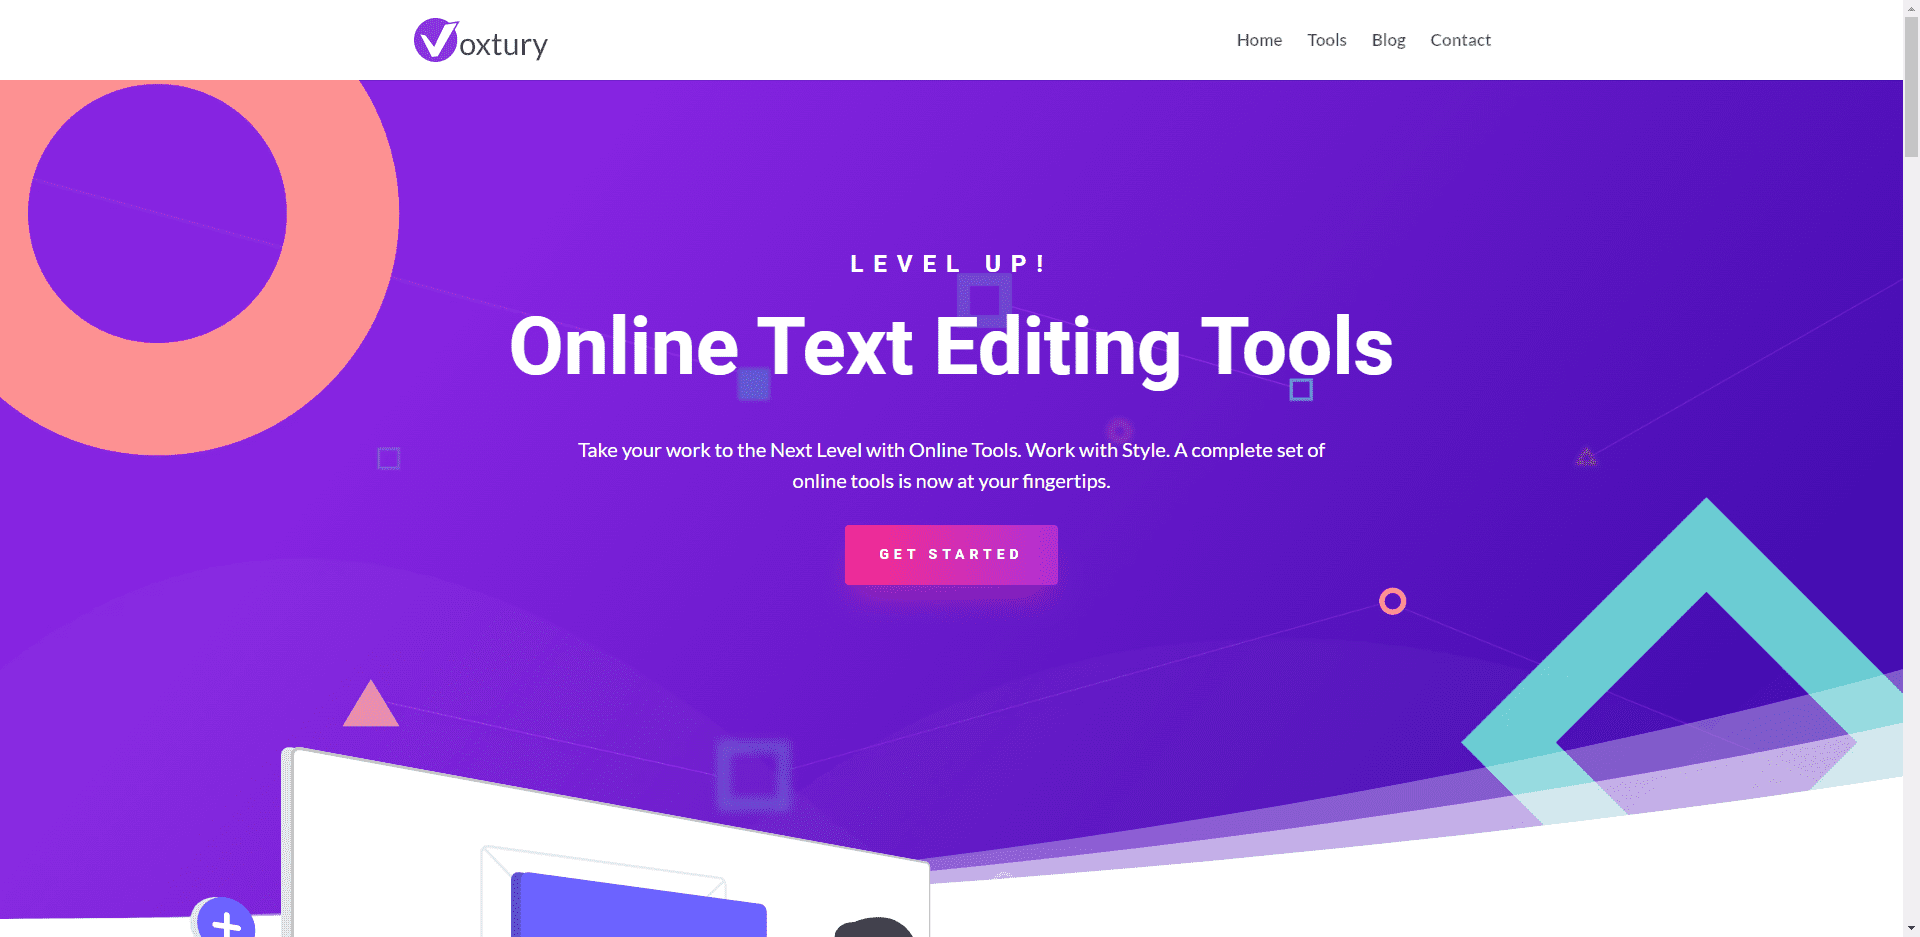 Voxtury home page